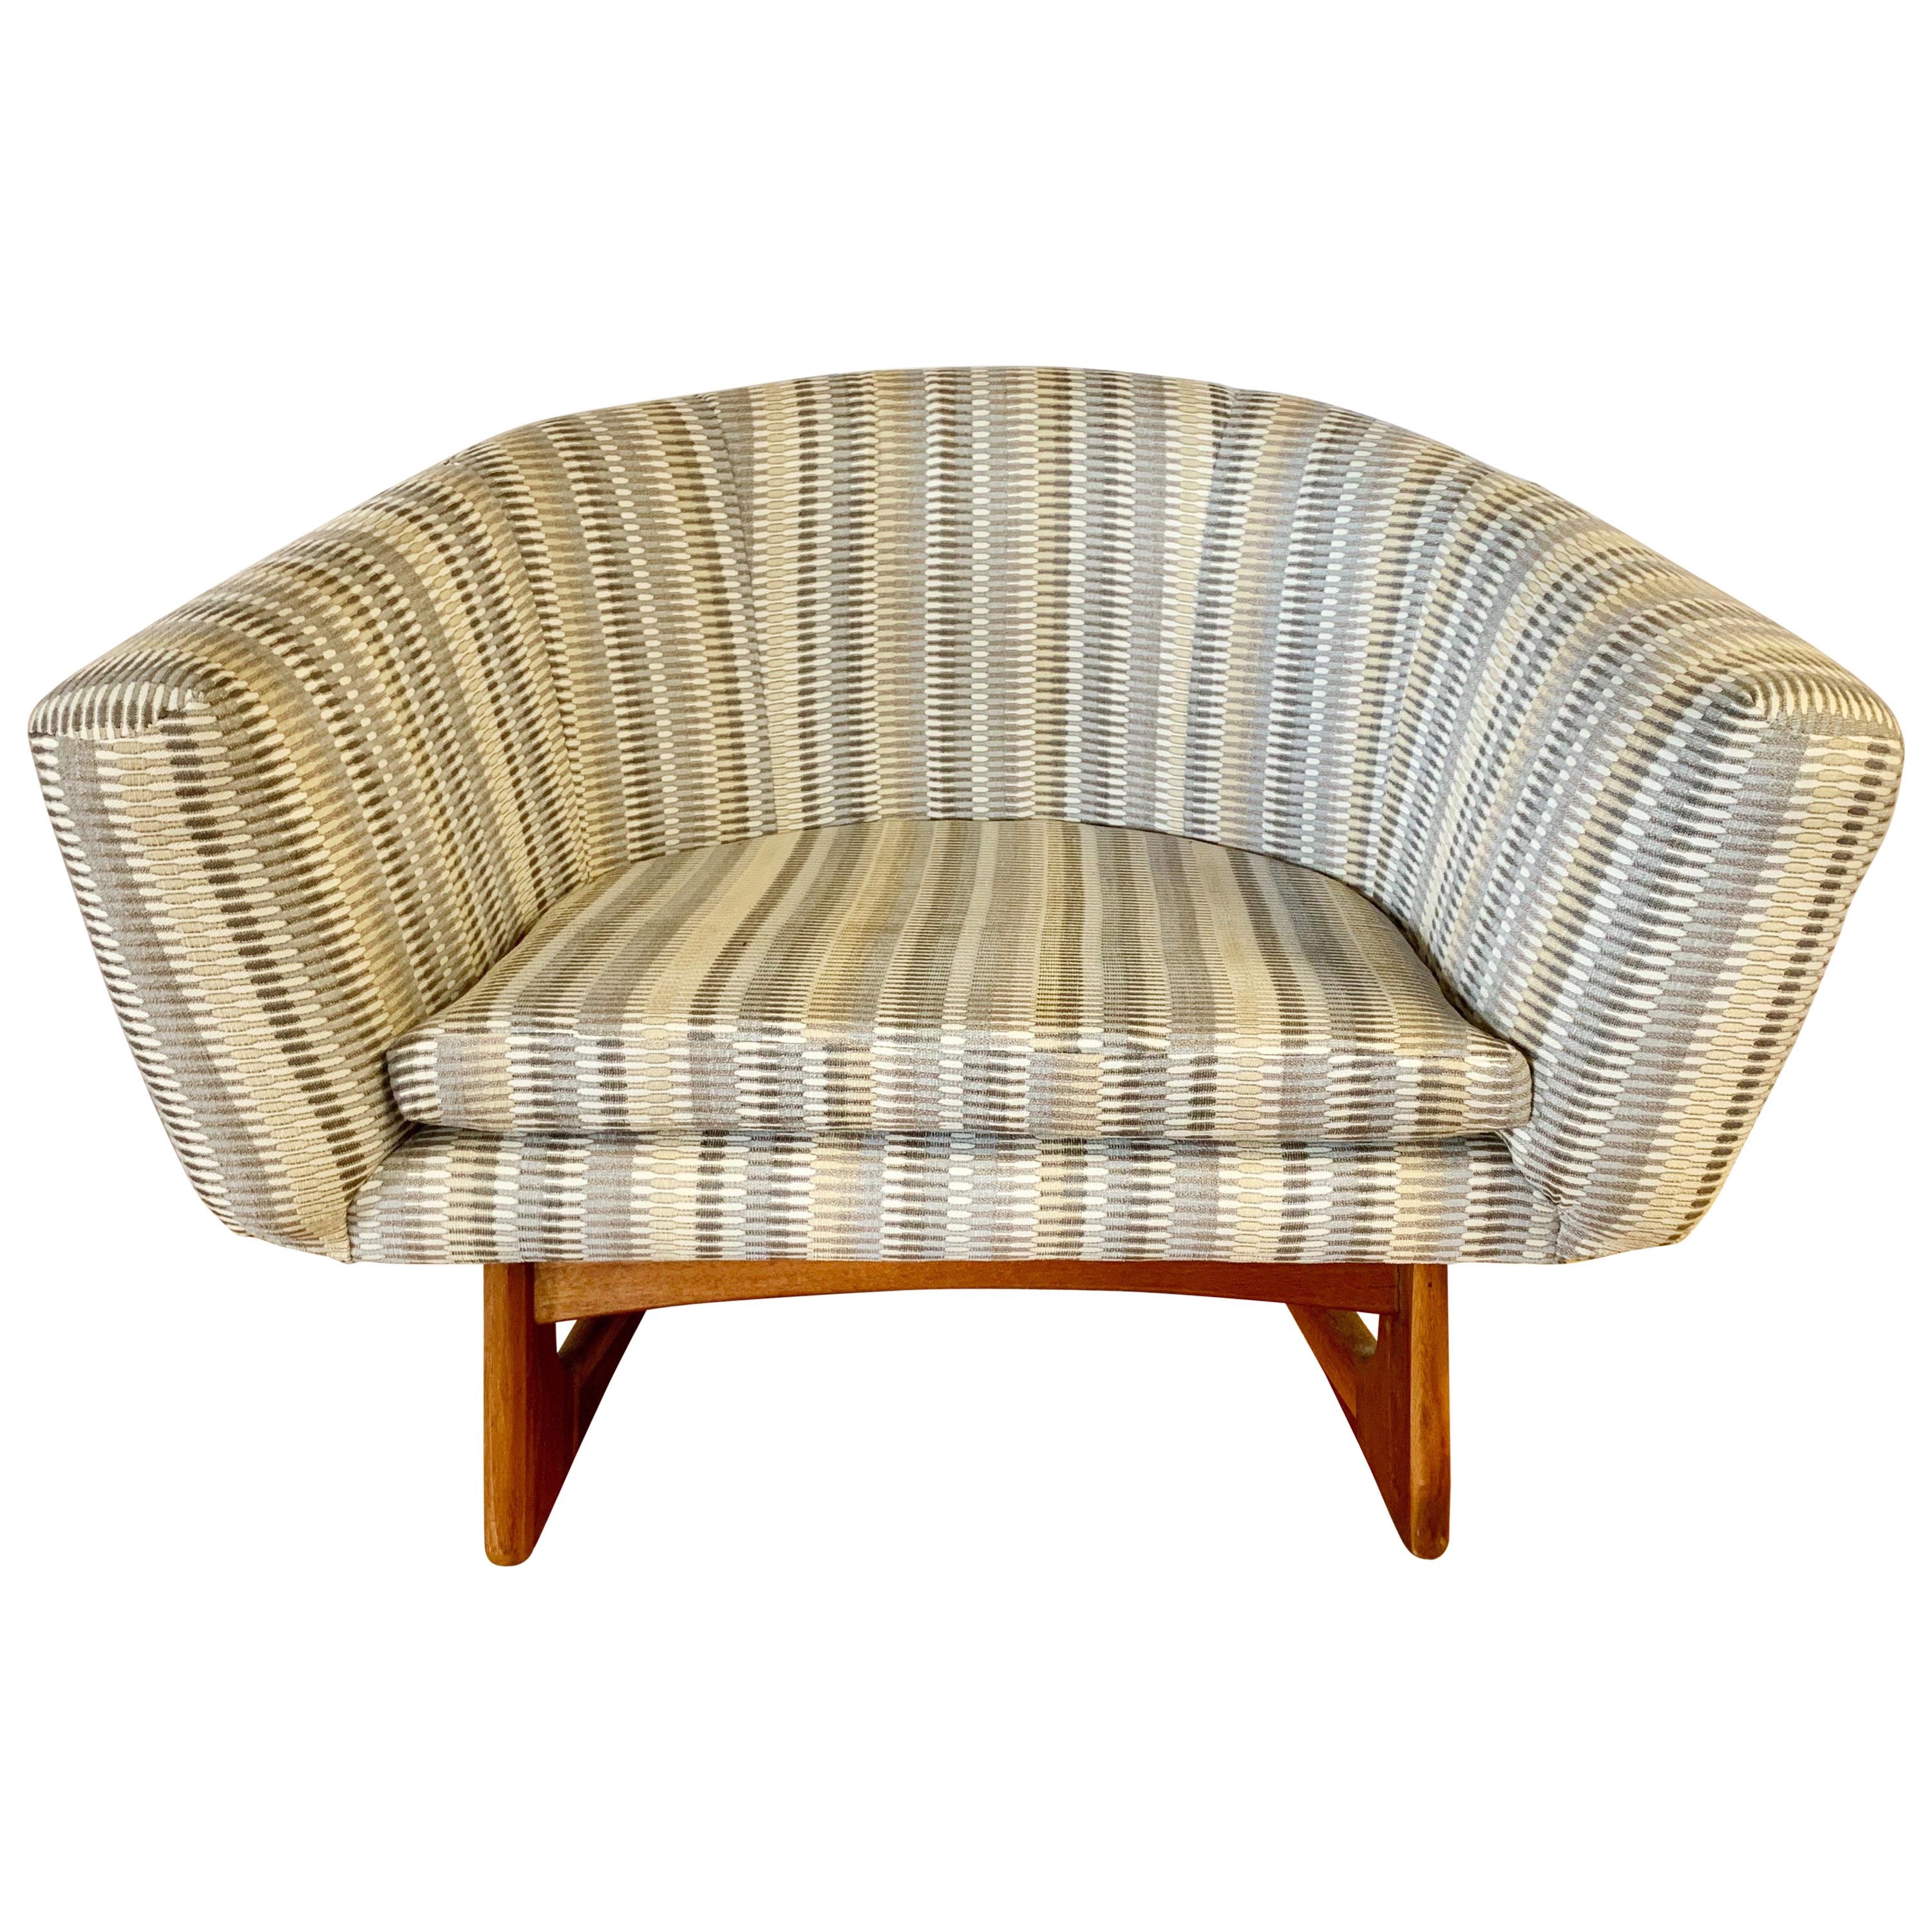 Mid-Century Modern Iconic Adrian Pearsall Lounge Chair with New Upholstery